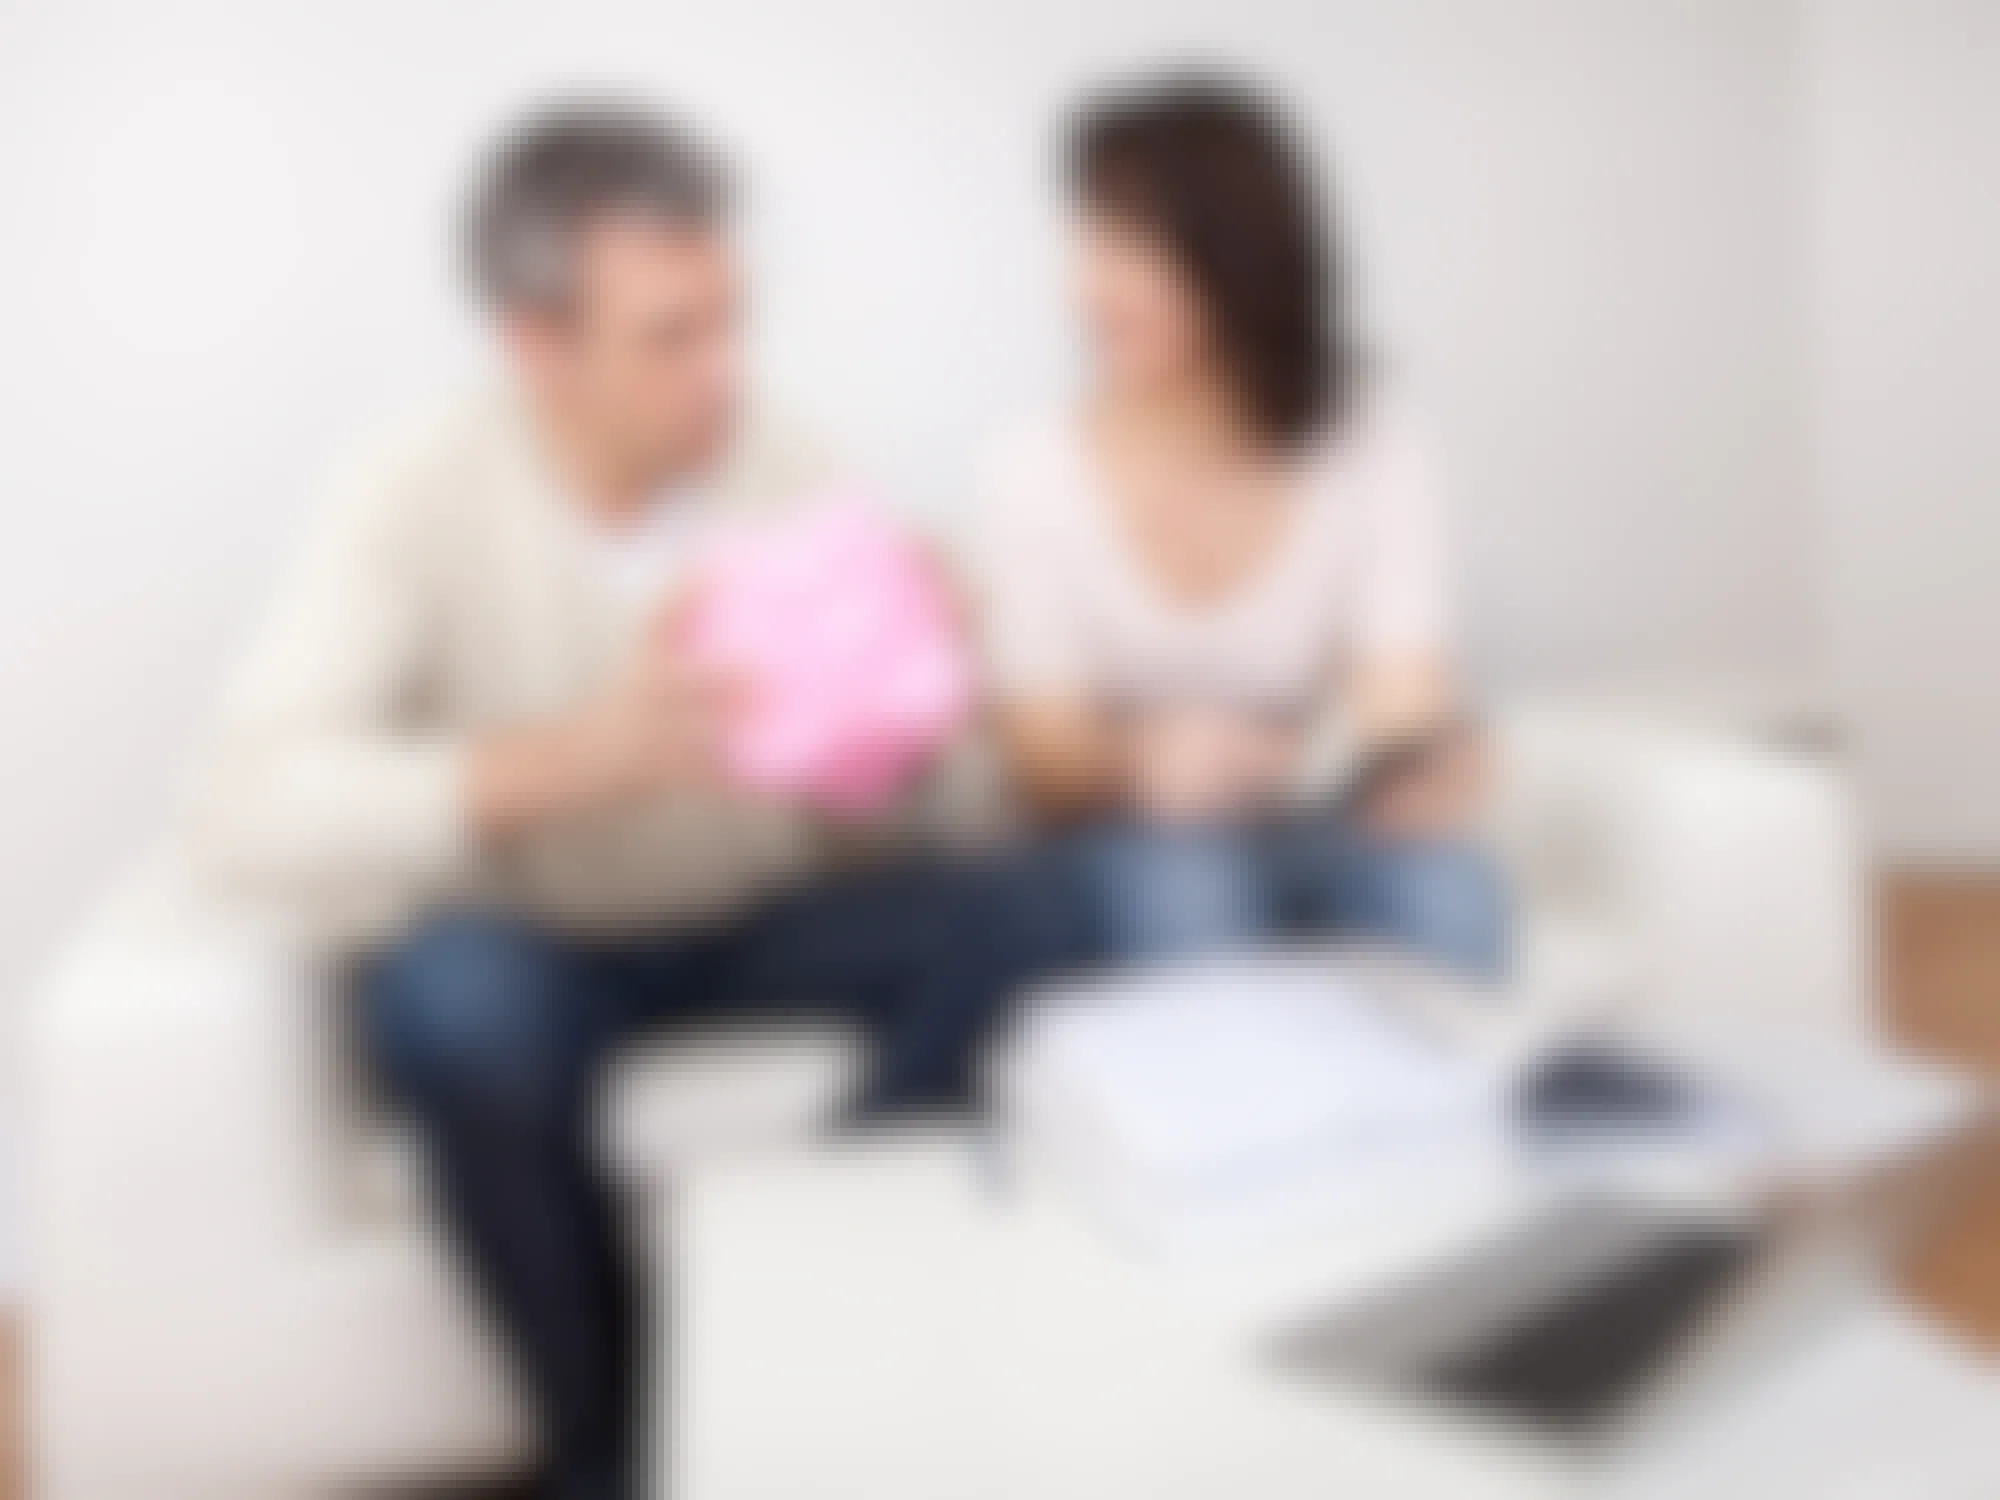 two people sitting on a couch one is talking and the other is holding a pink piggy bank